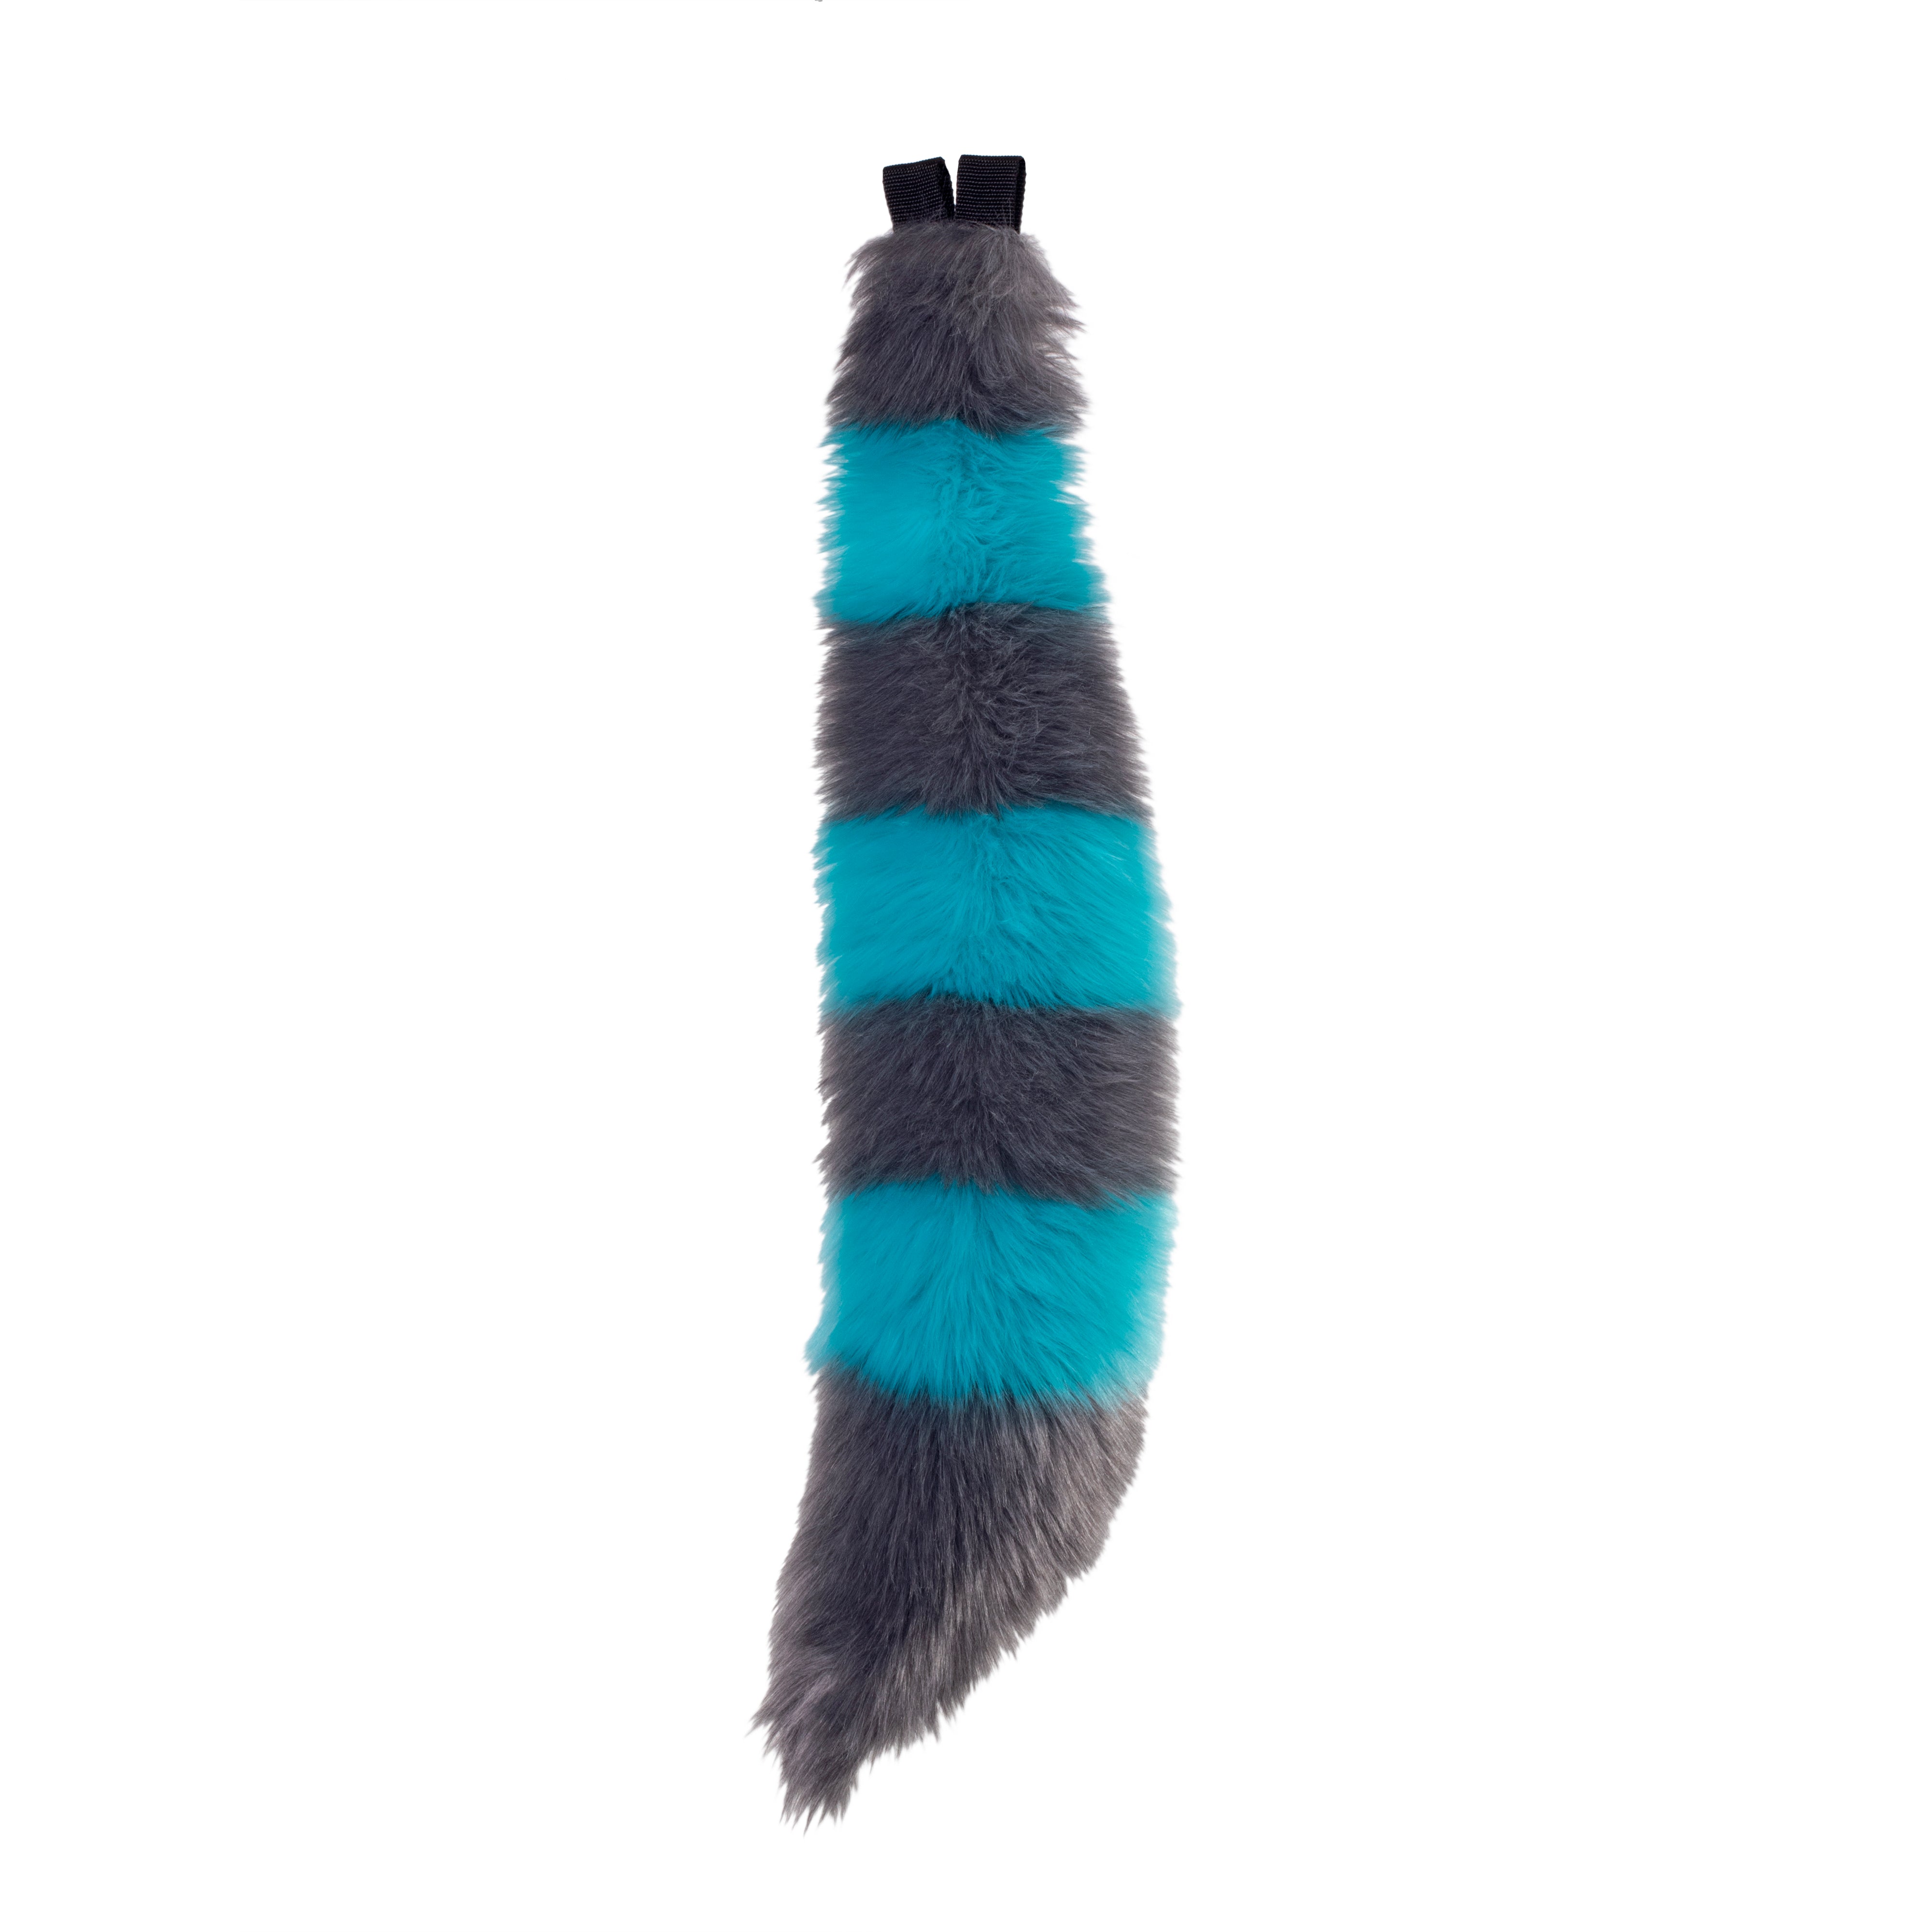 Cheshire Full Fox Tail - Pawstar Pawstar Tails canine, cosplay, costume, fox, furry, ship-15, ship-15day, tail